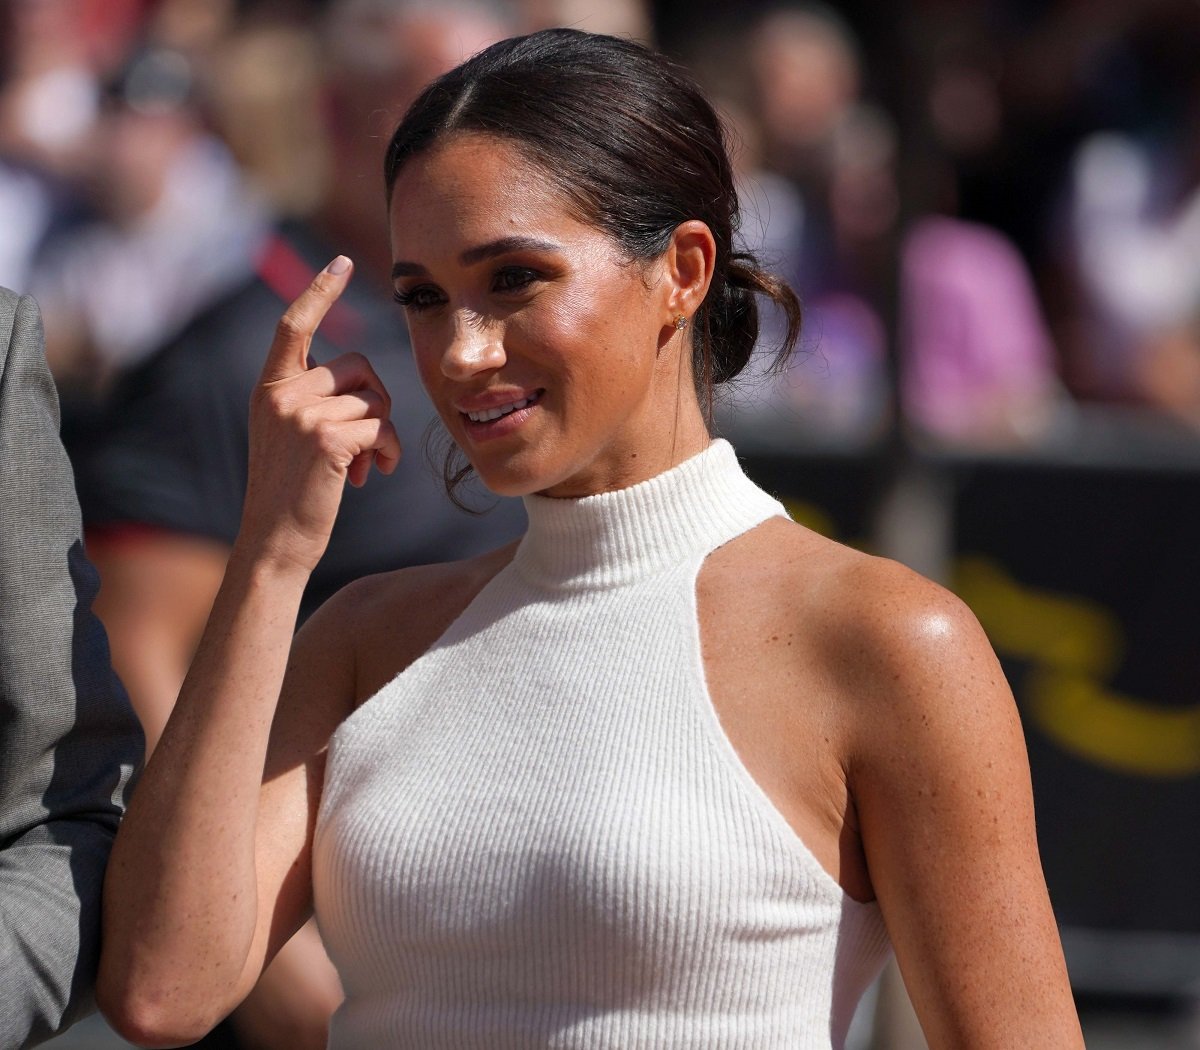 Body Language Expert Points Out Gestures Meghan Markle Uses to Appear Equal and ‘Less Like an A-lister’